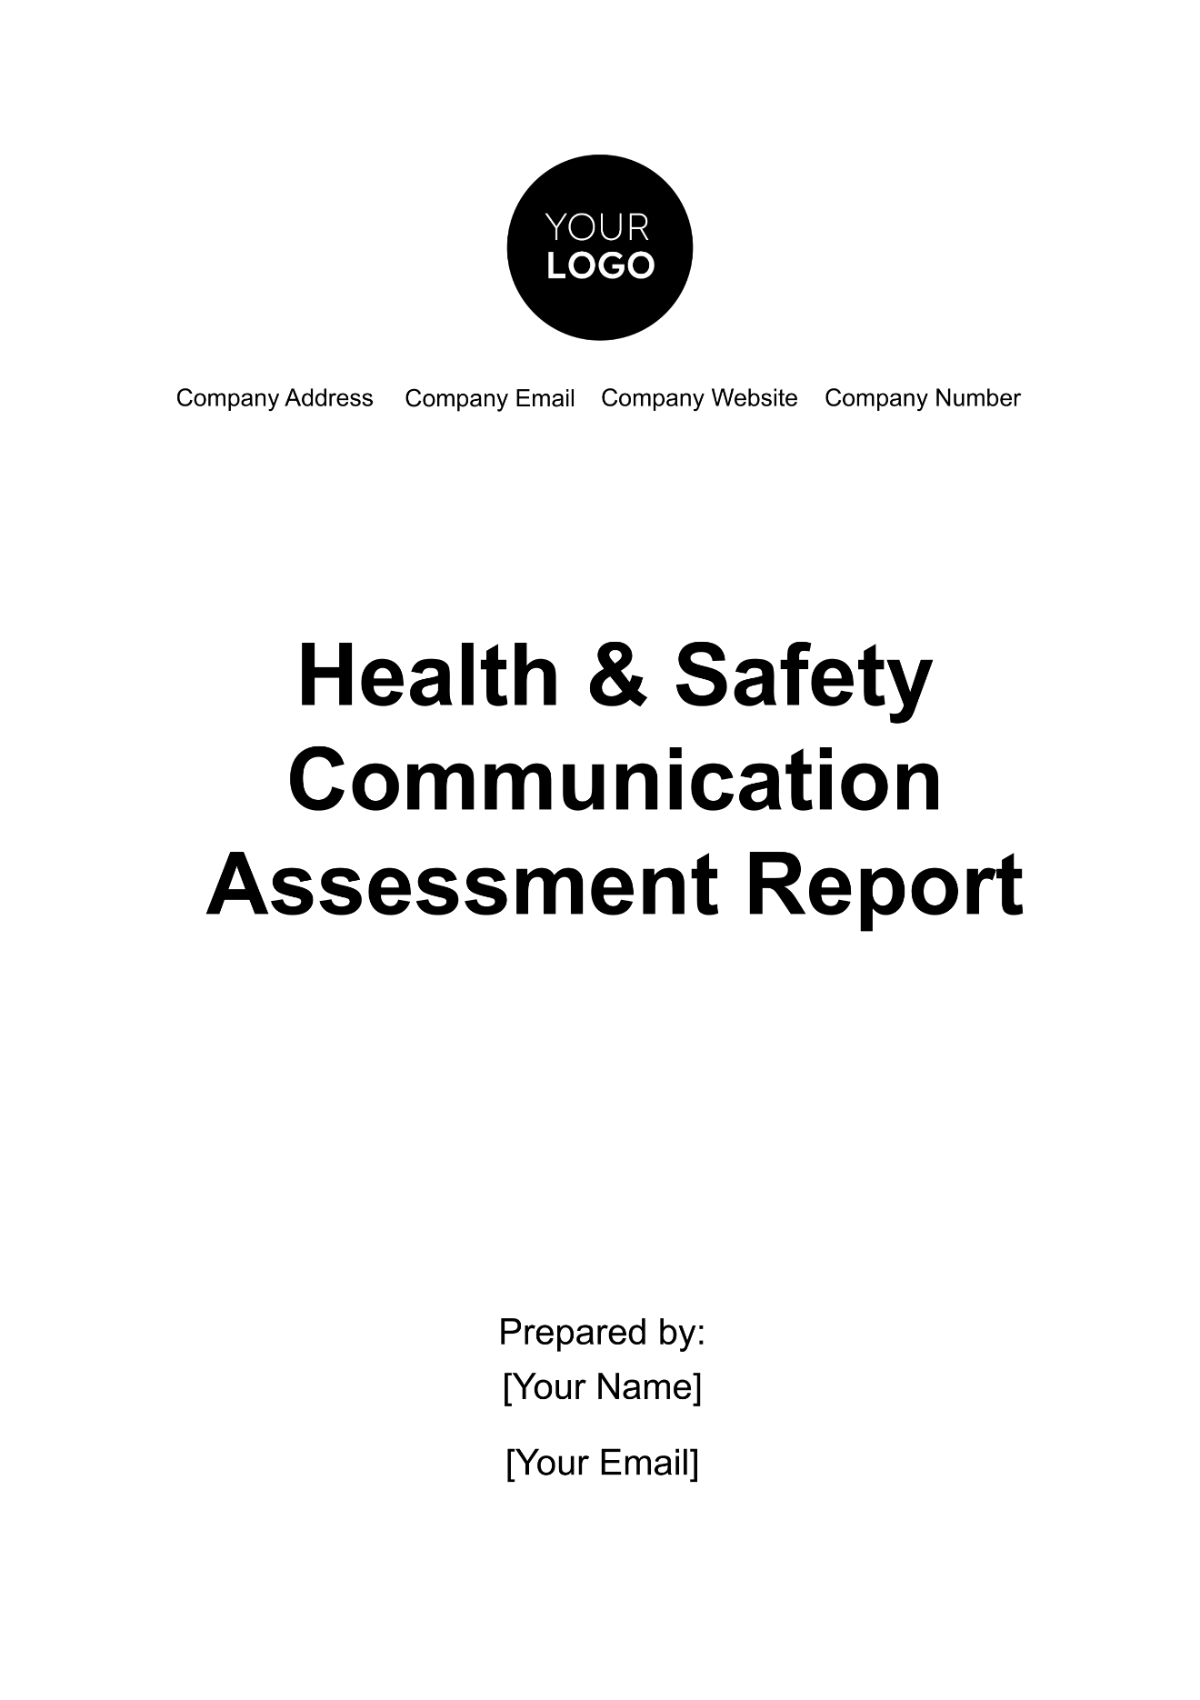 Health & Safety Communication Assessment Report Template